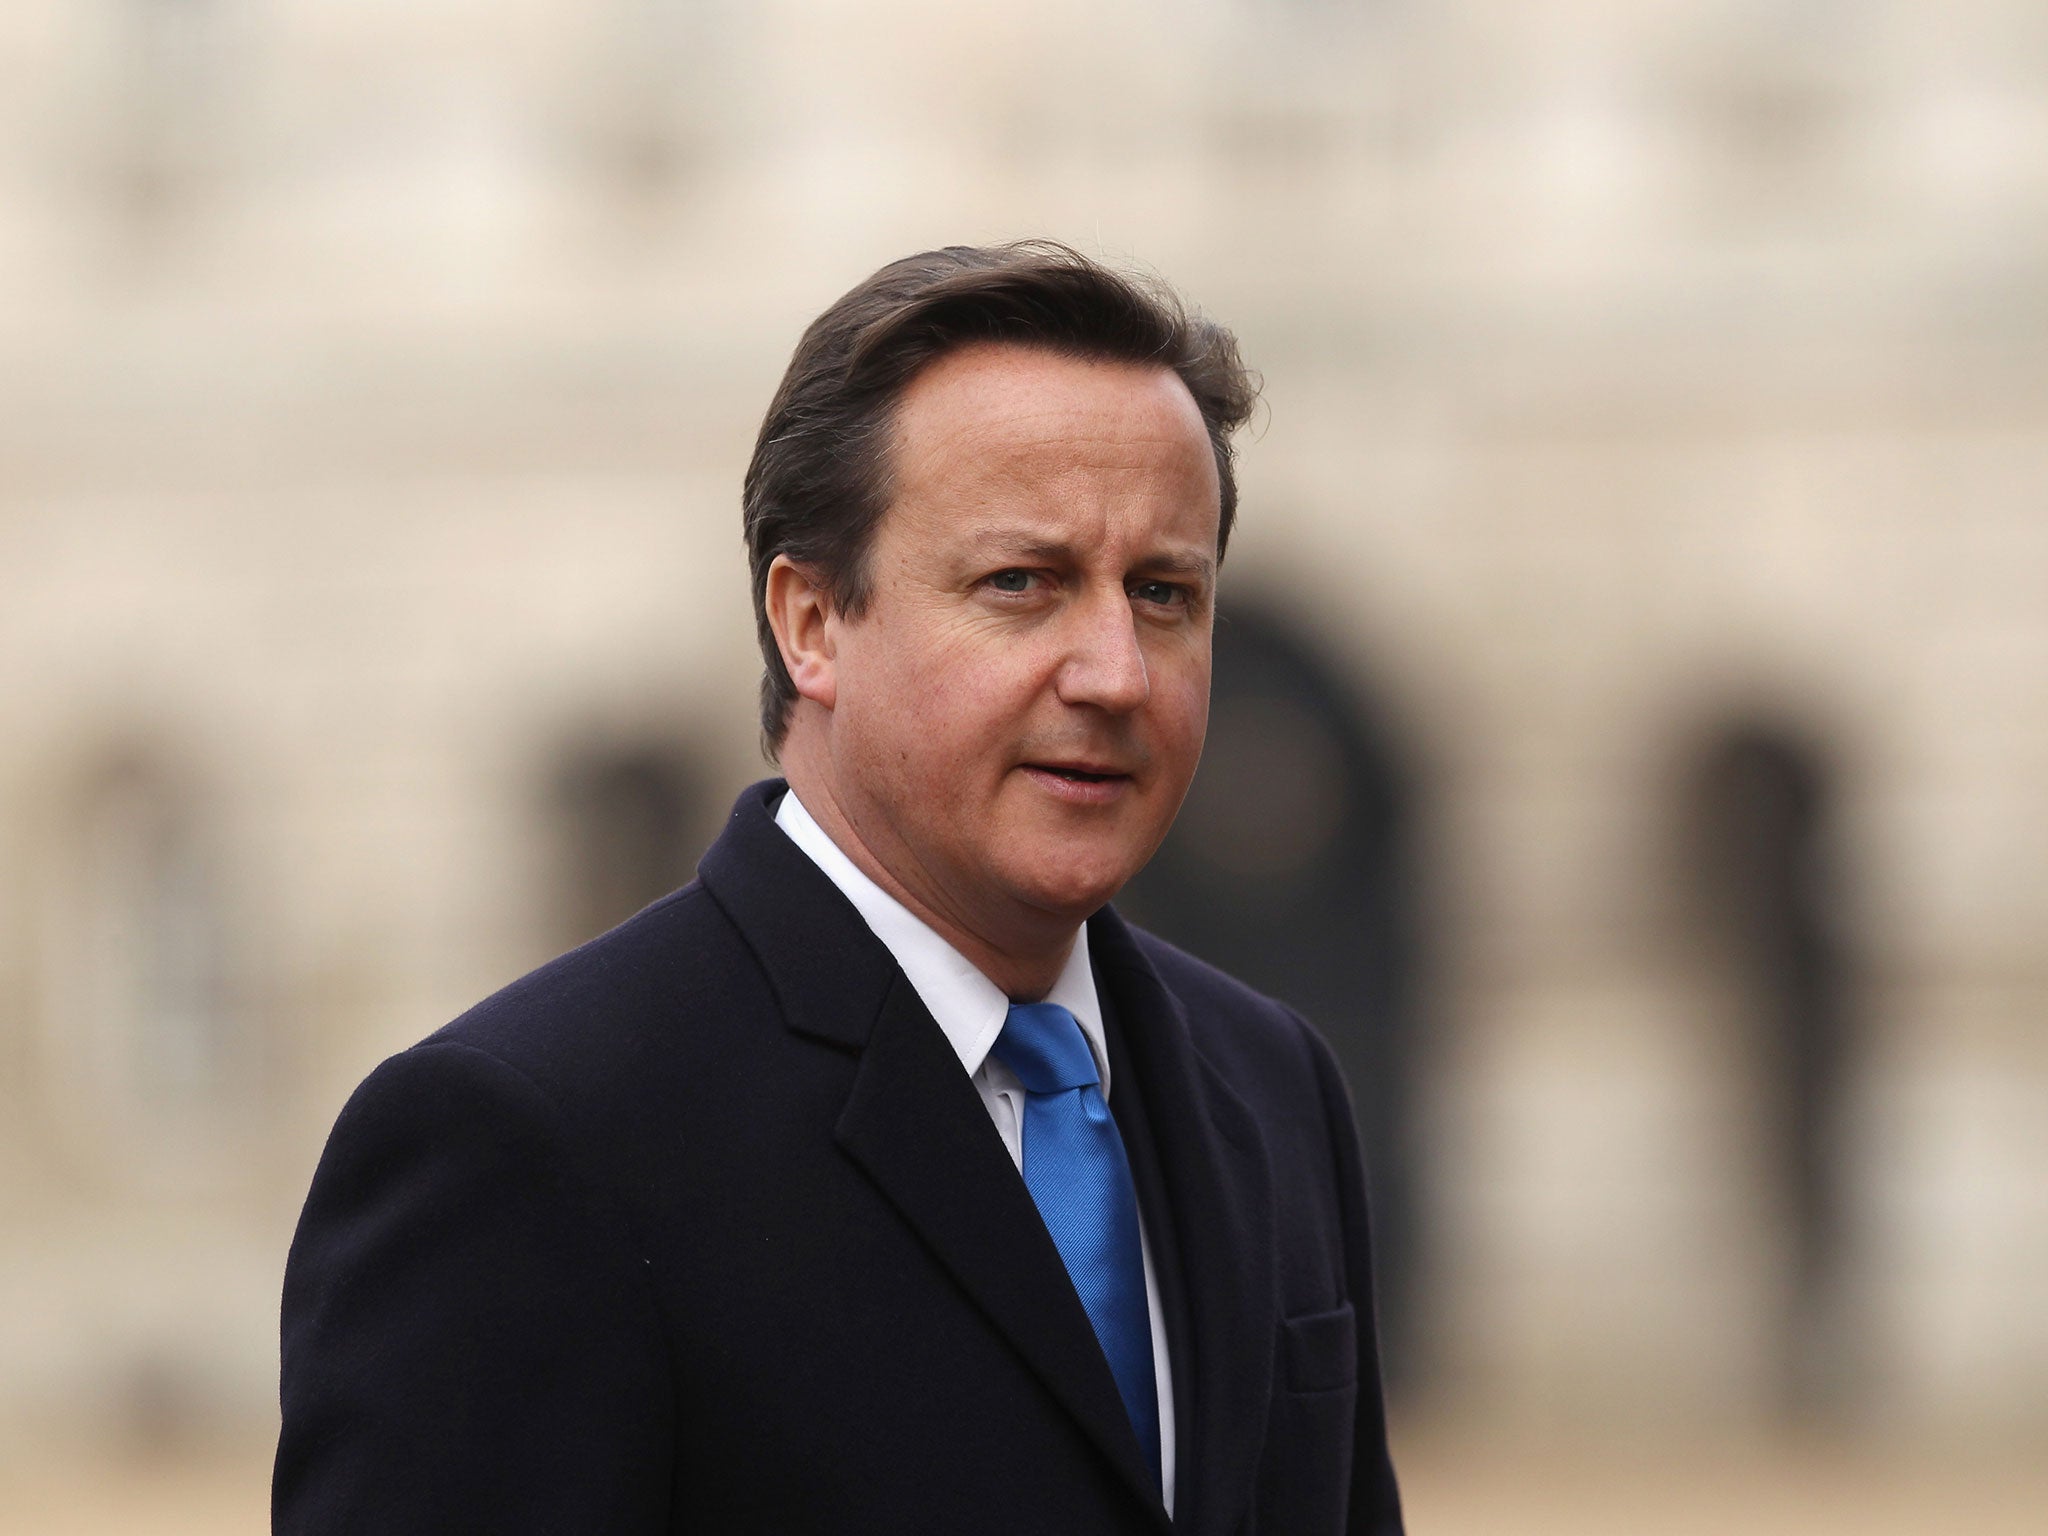 David Cameron has said he will not 'put boots on the ground'